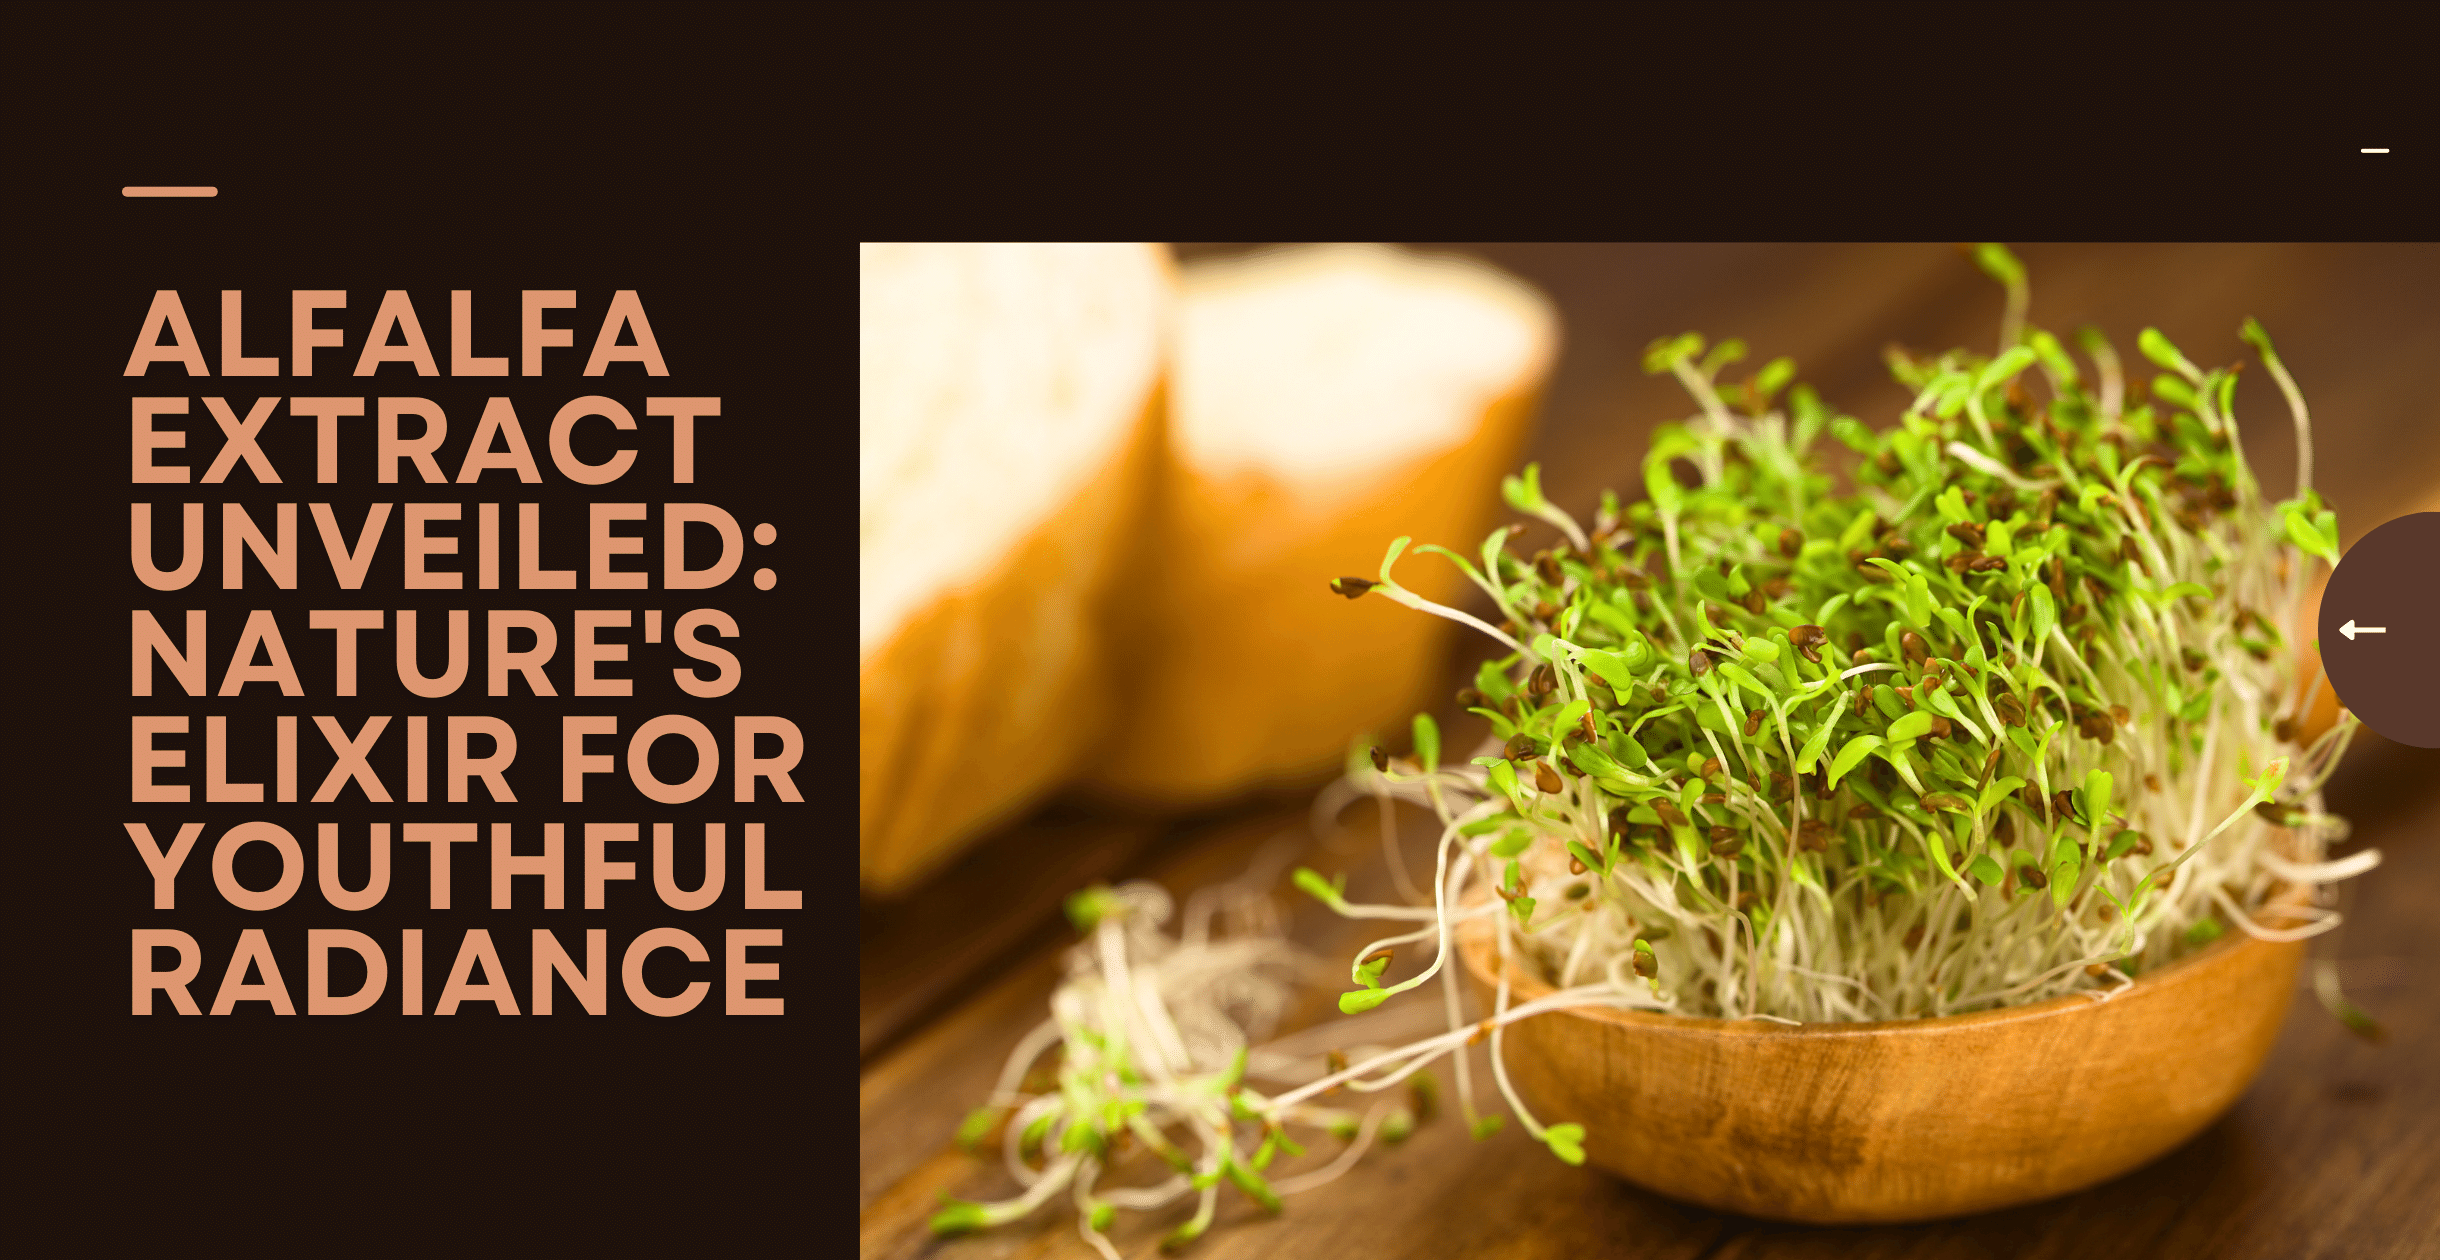 Alfalfa Extract Unveiled: Nature's Elixir for Youthful Radiance